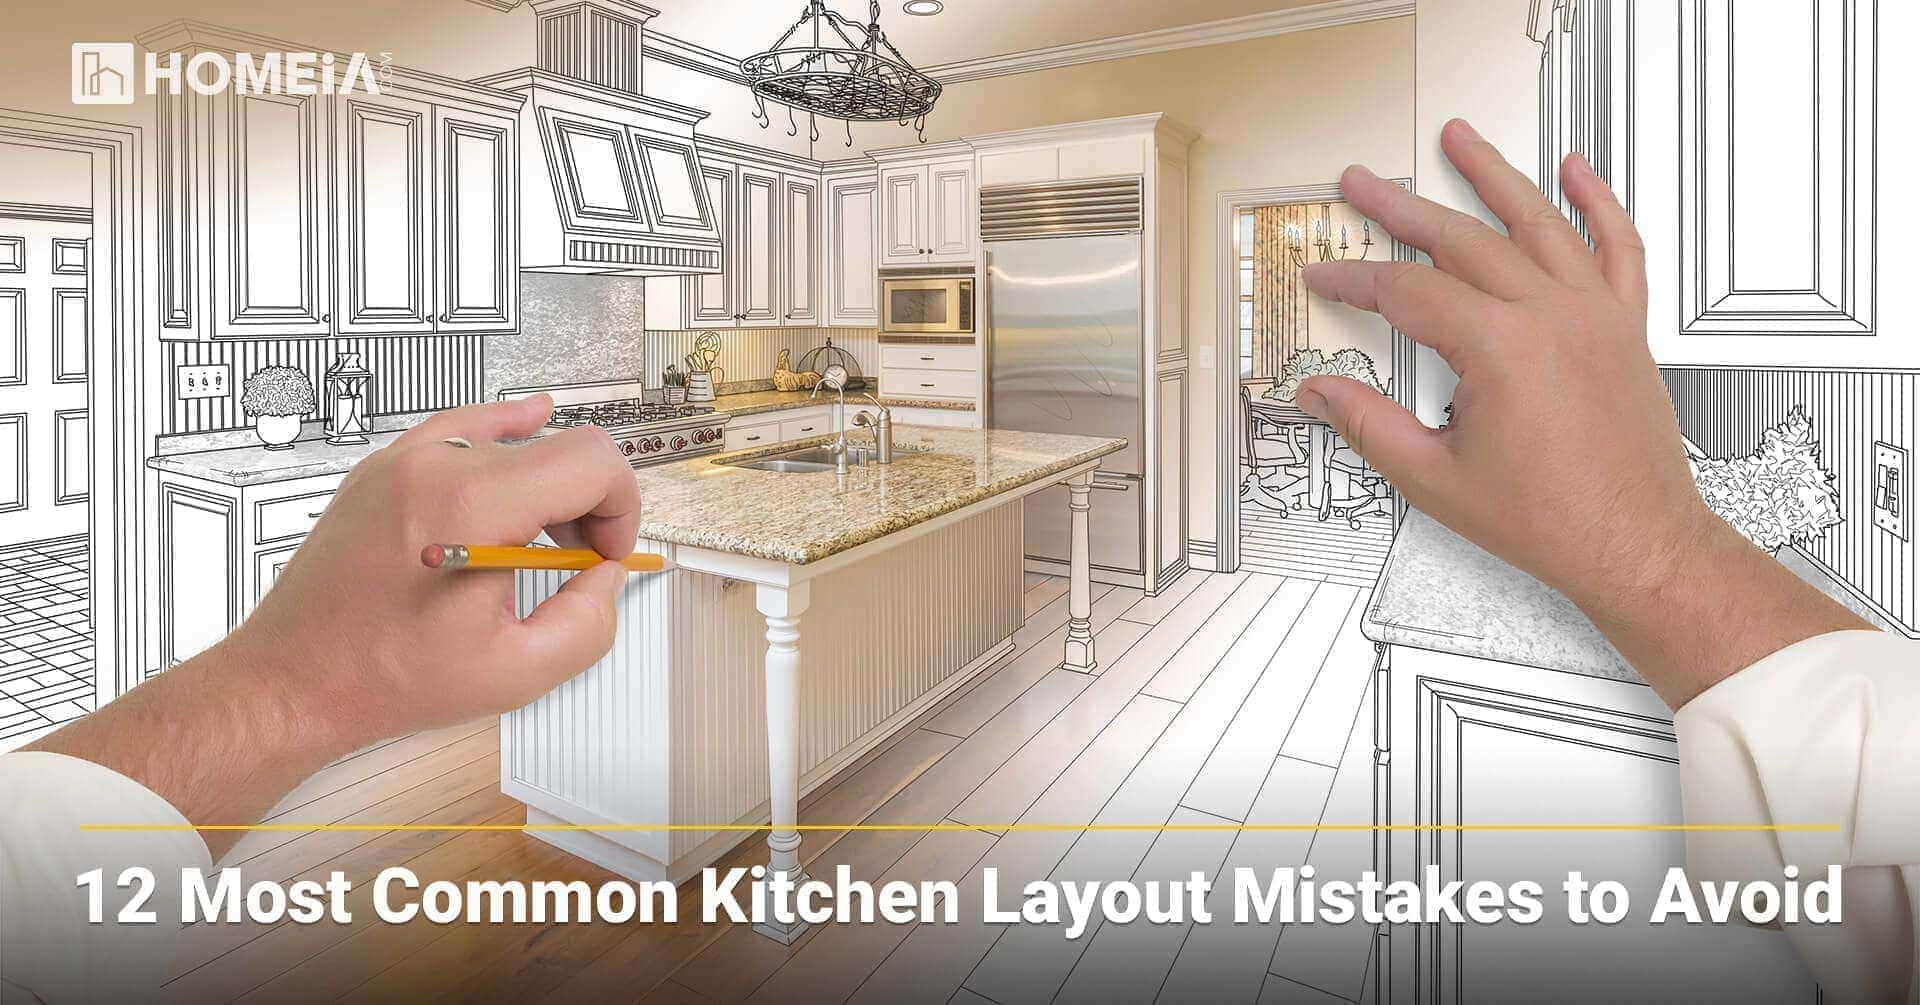 20 Most Common Kitchen Layout Mistakes to Avoid   HOMEiA